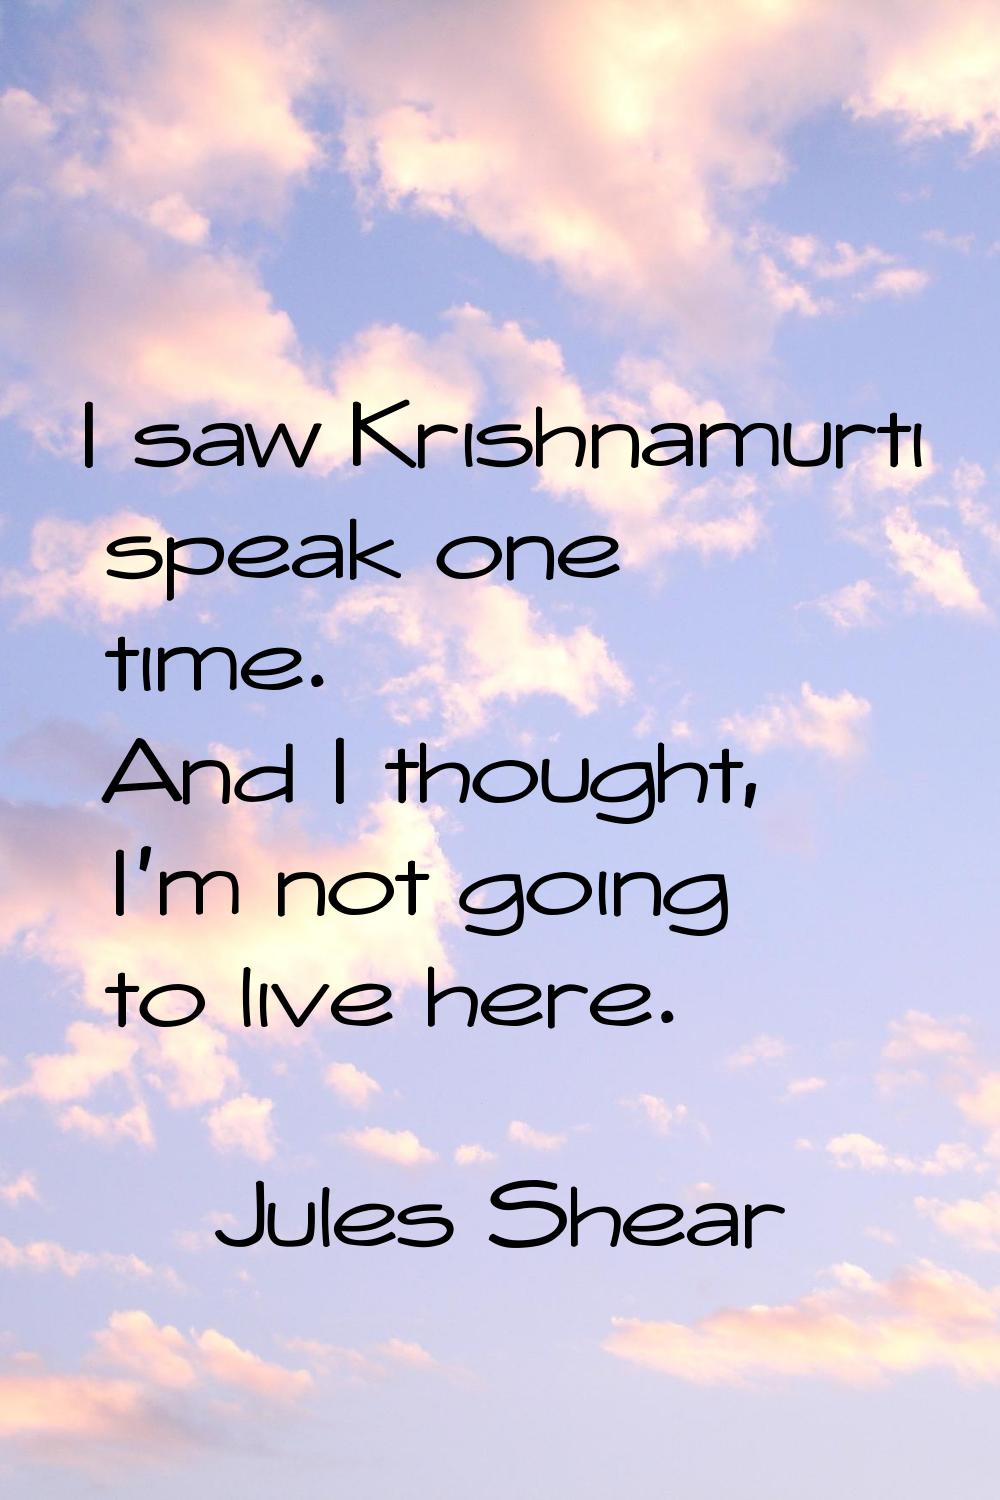 I saw Krishnamurti speak one time. And I thought, I'm not going to live here.